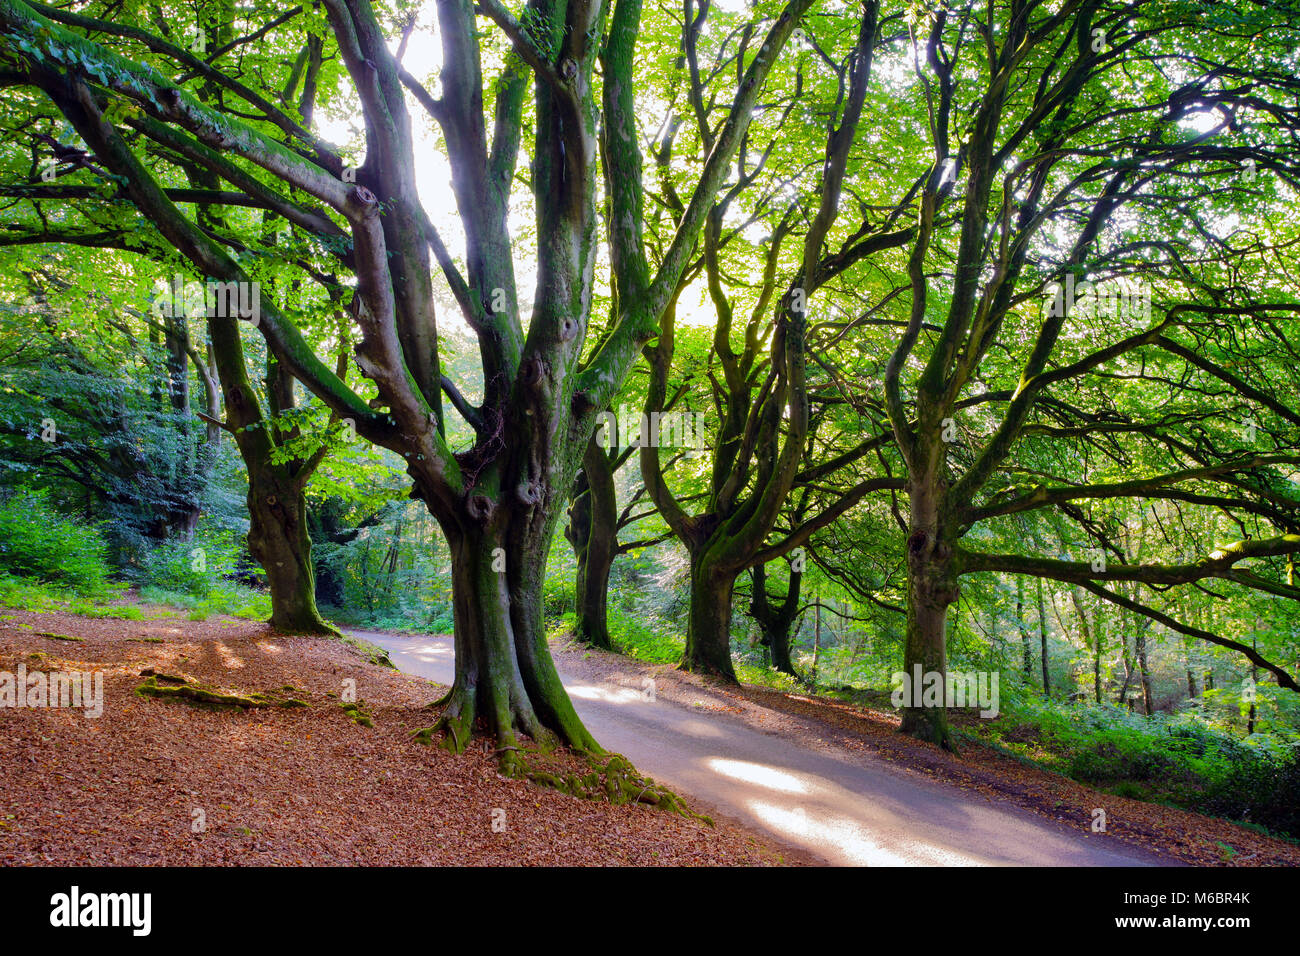 A summer view of the green and leafy countryside near Honiton in Devon, England, UK. Stock Photo